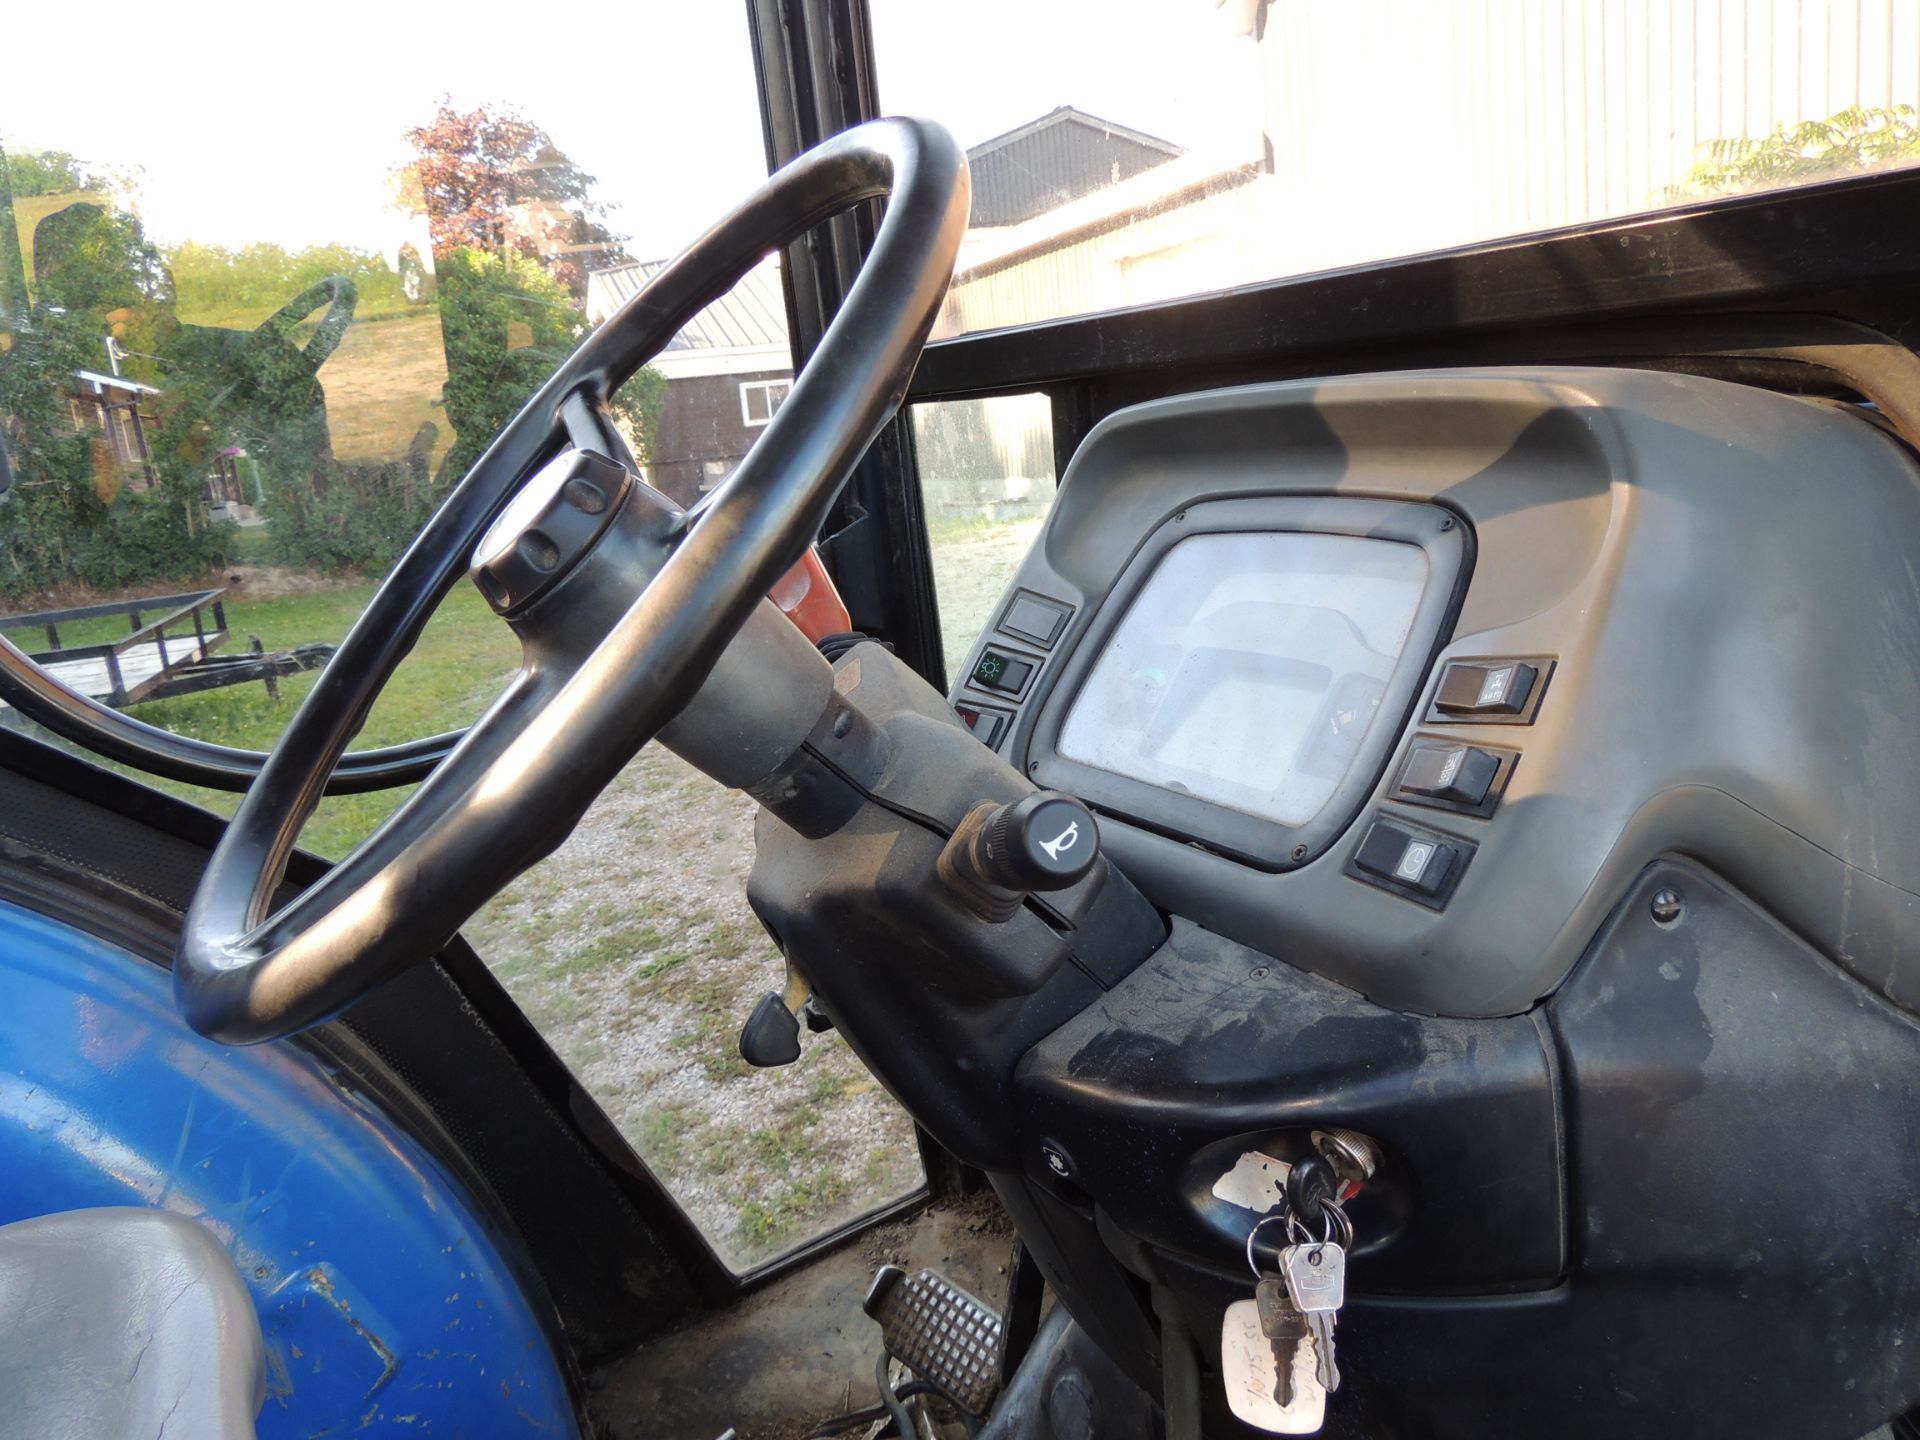 NEW HOLLAND TN75S DIESEL TRACTOR WITH IVECO 2.9L 3 CYLINDER ENGINE, 16.9-30 REAR TIRES, ENCLOSED - Image 4 of 5